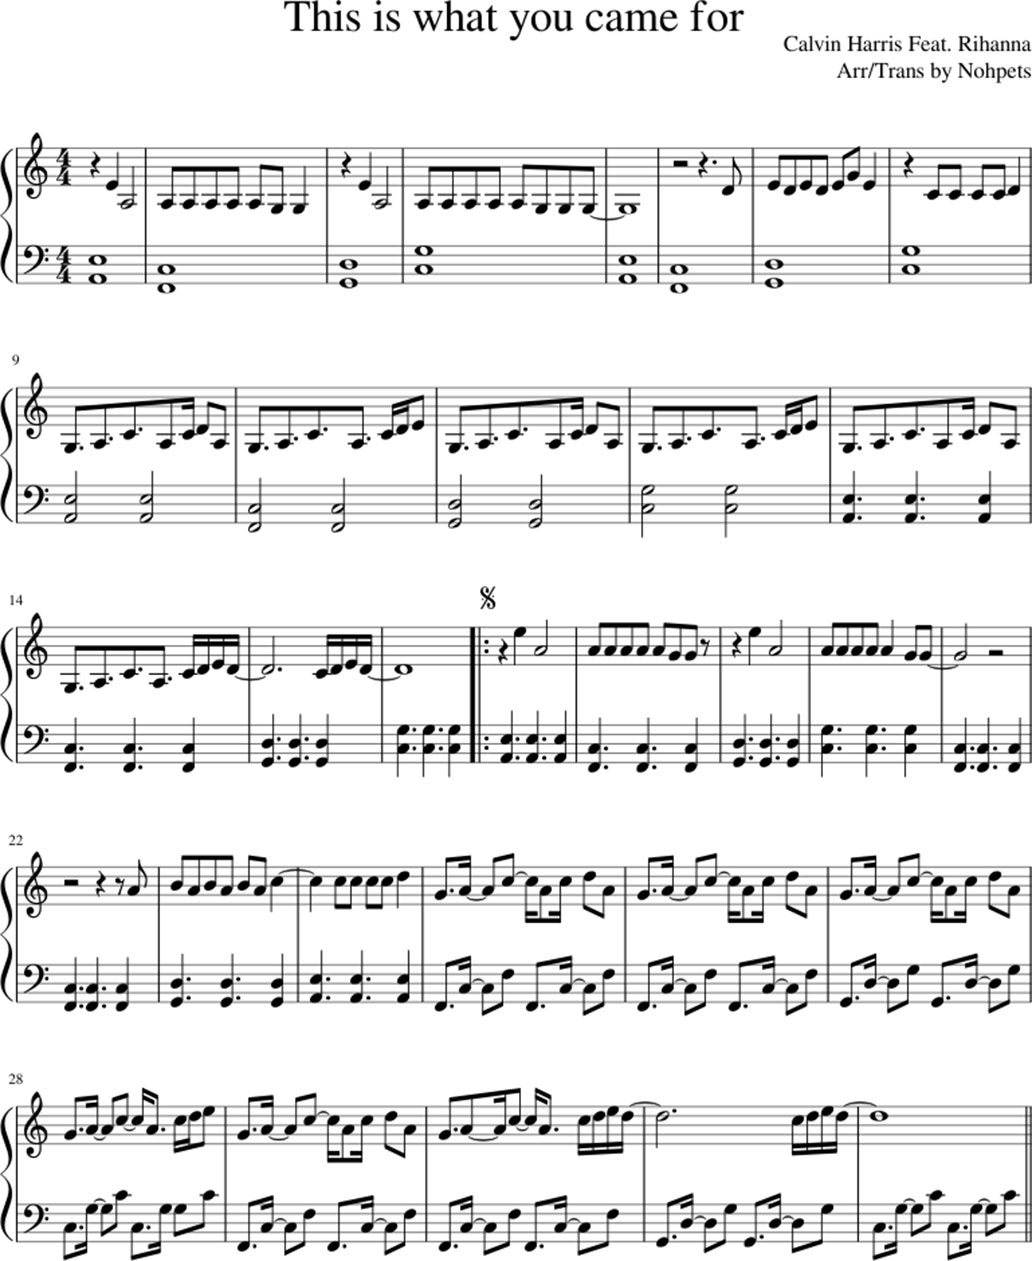 This is what you came for sheet music notes 1